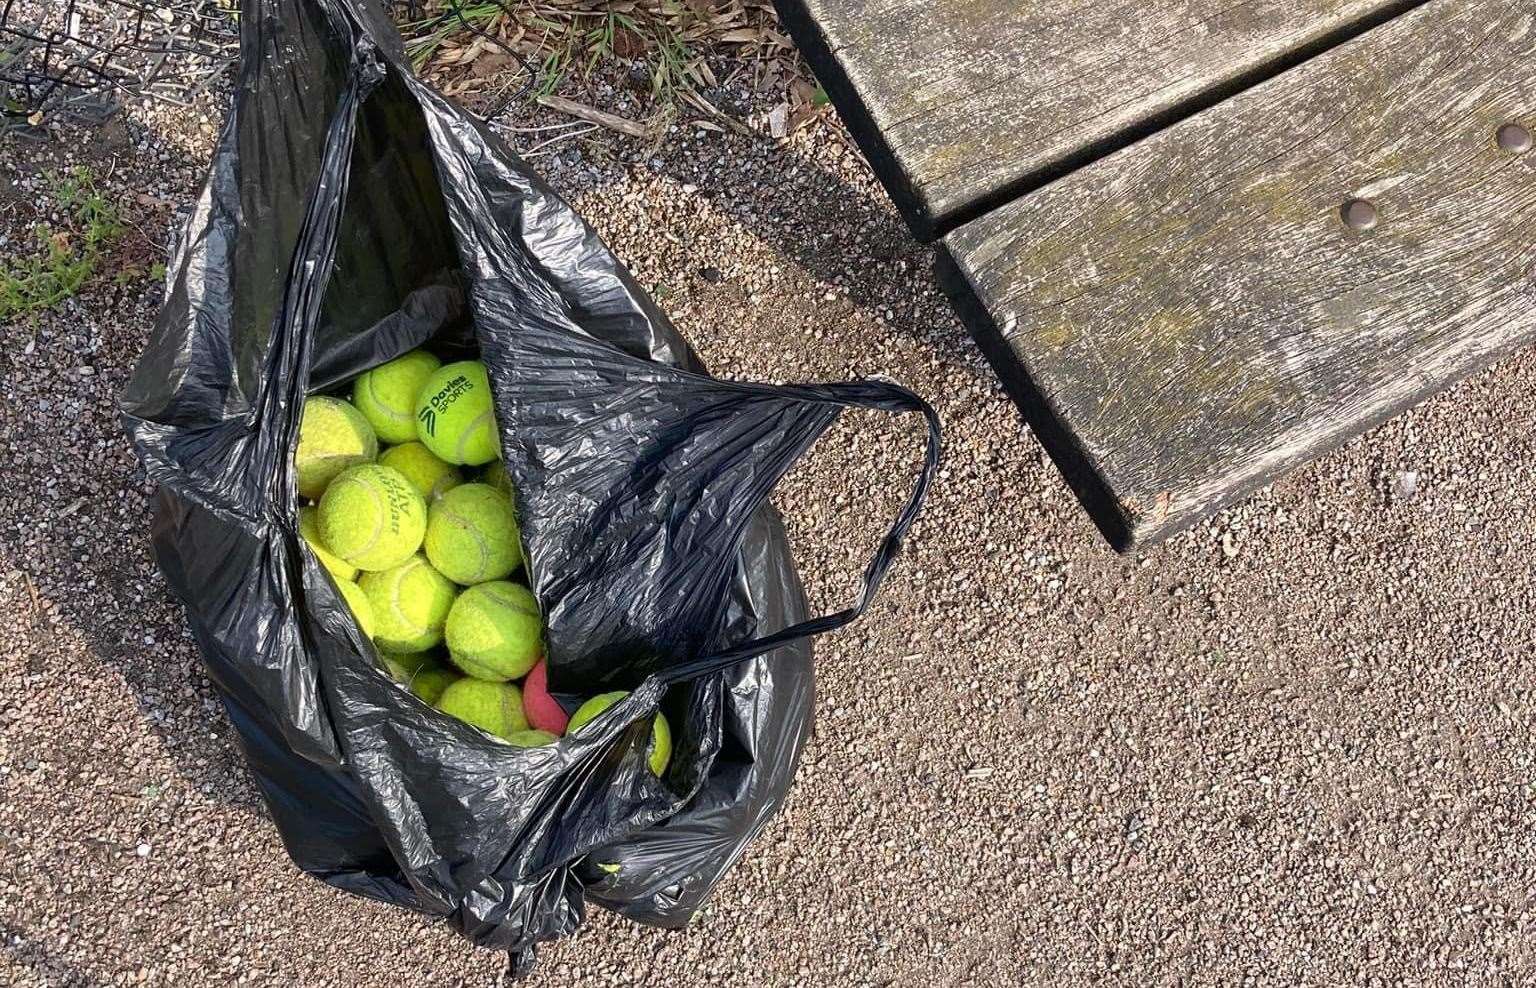 The 42-year-old has dropped off several bags at Jackson's Field Tennis Courts. Picture: Shauneen Fowler